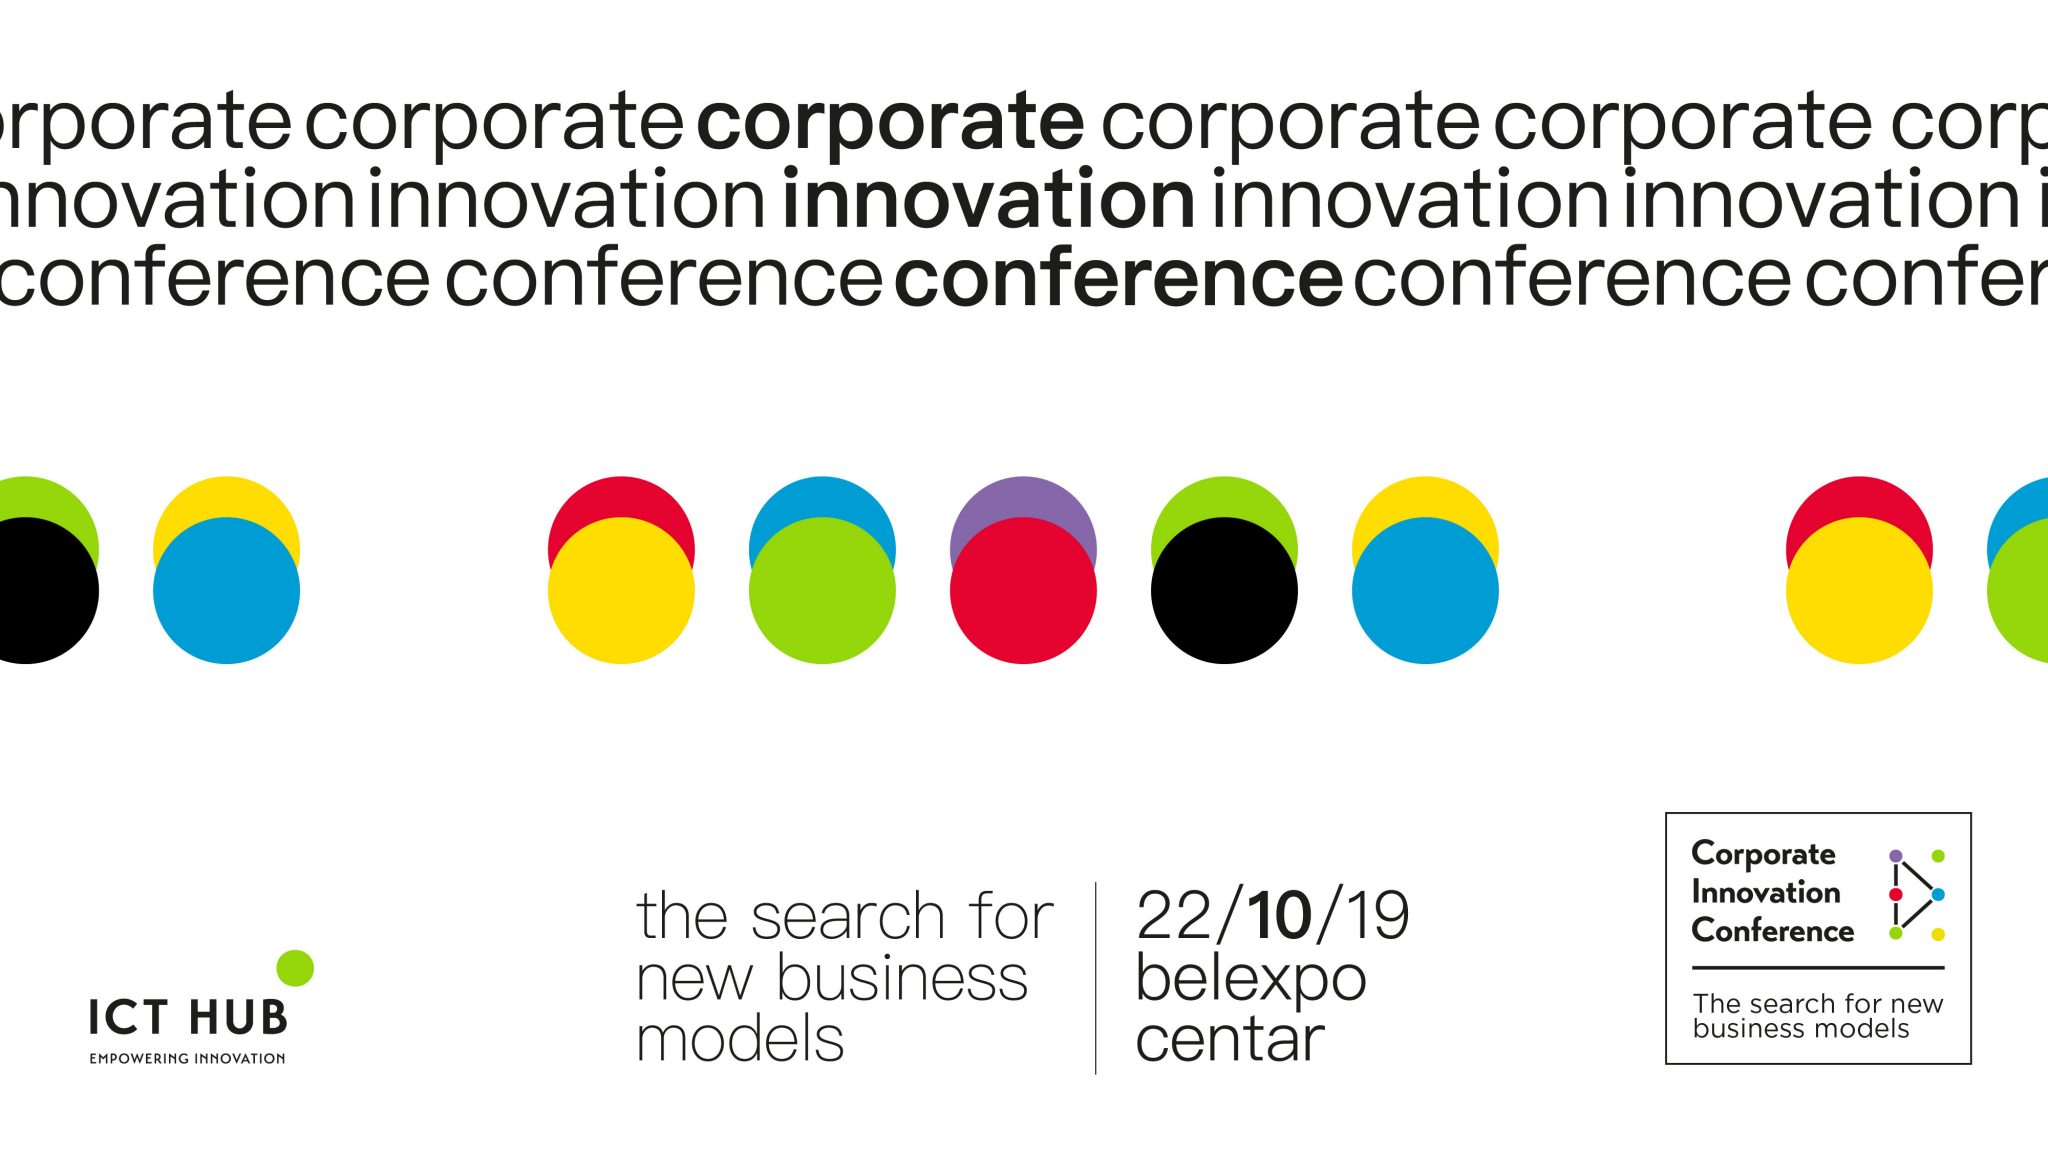 BUSINESS NEWS: Corporate Innovation Conference 2019.